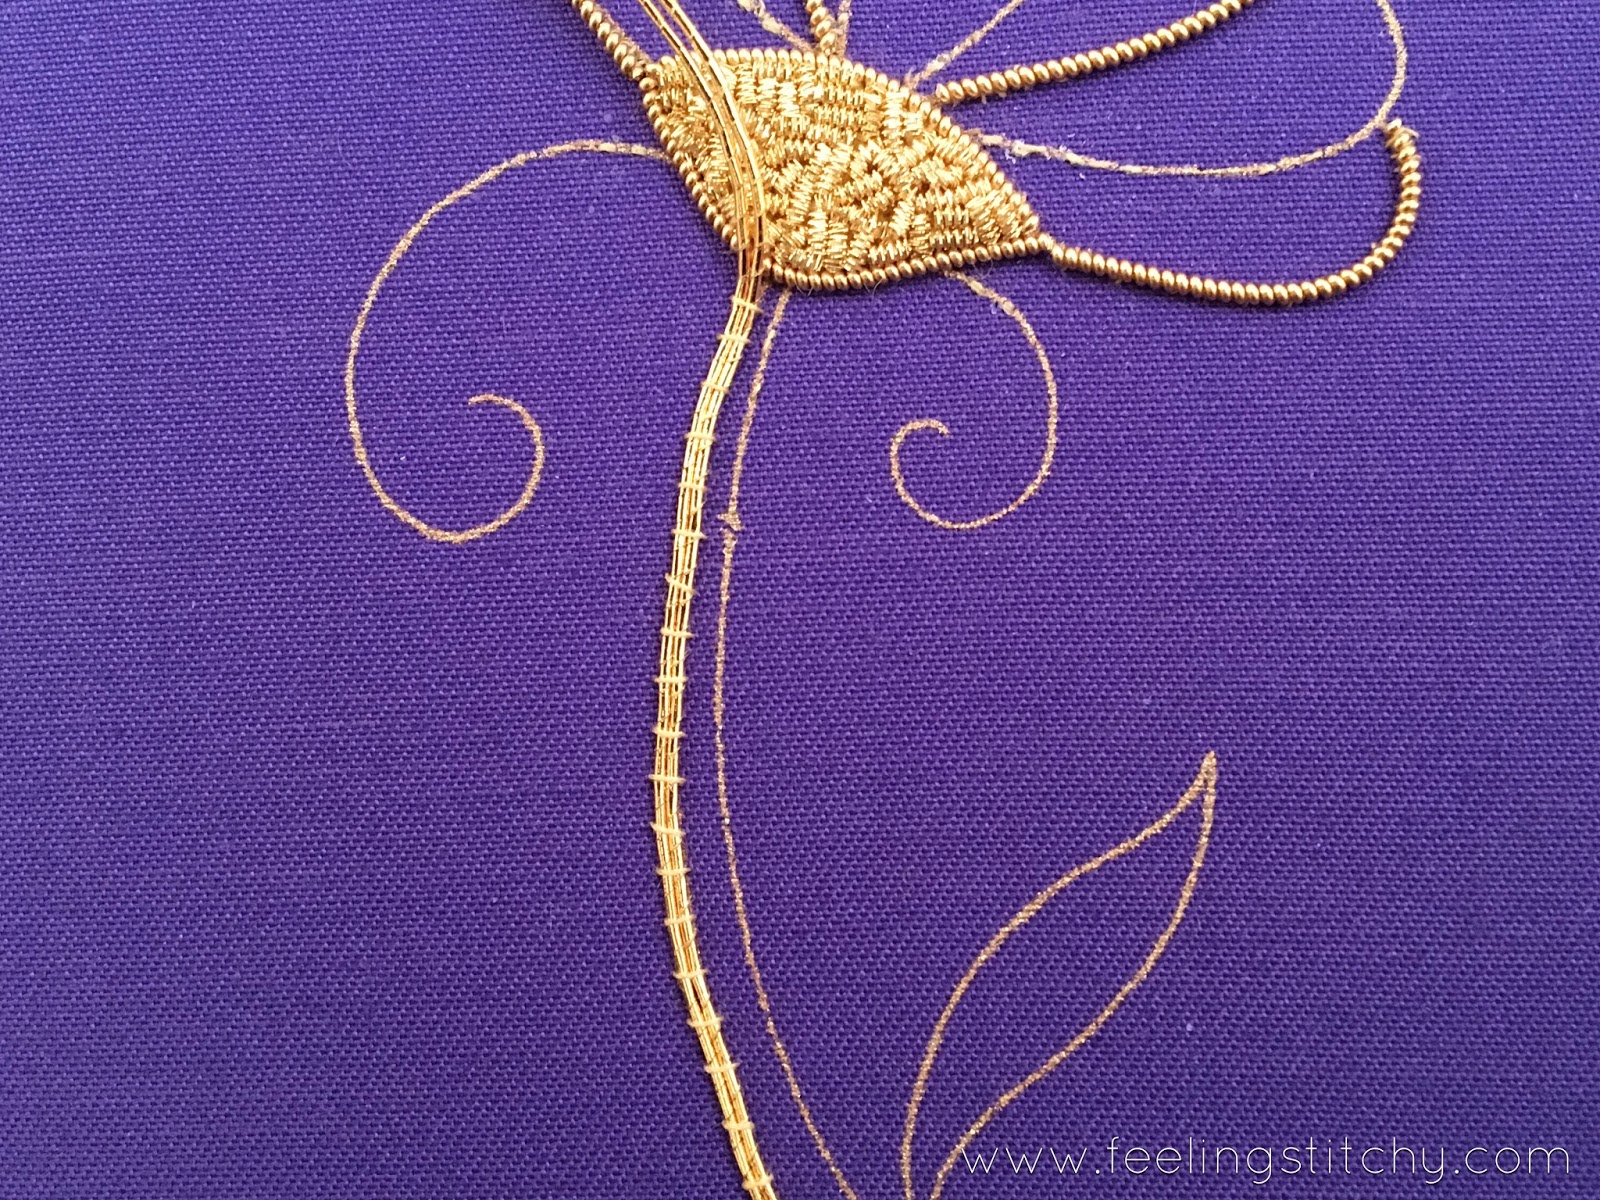 Goldwork Daisy Part 2 by Michelle for Feeling Stitchy